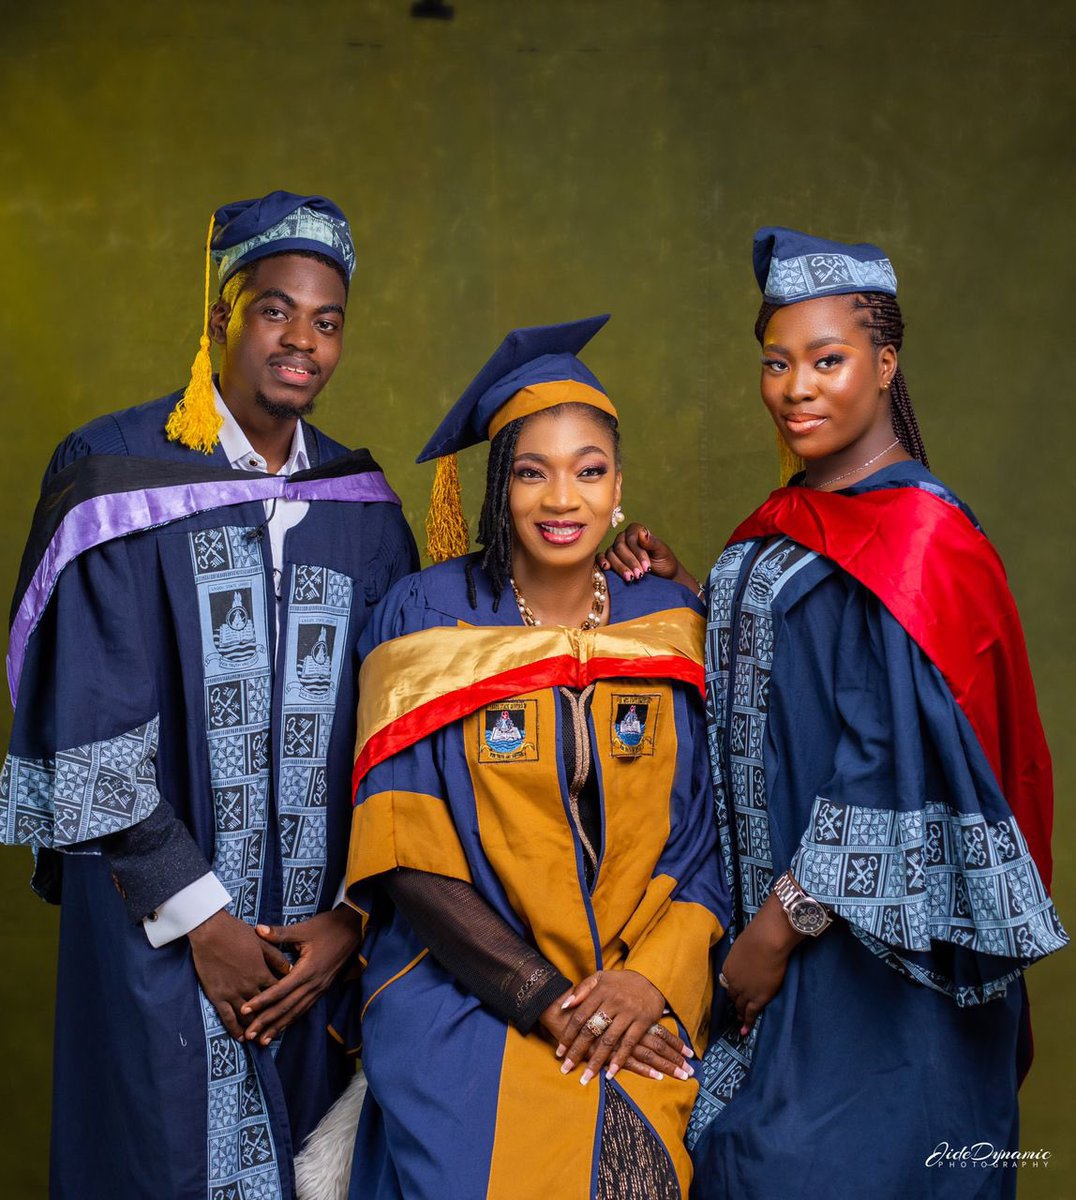 This has to be the hardest convocation picture 🥺😭. 
The guy on the right is Kehinde, he got a BSC 
The lady on the right is Taiwo, she got her LLB
The woman in the middle is their mum. She got her LLM

All got their degrees yesterday at #LASU26thConvocation 
🥺💃🏾 @LASUOfficial